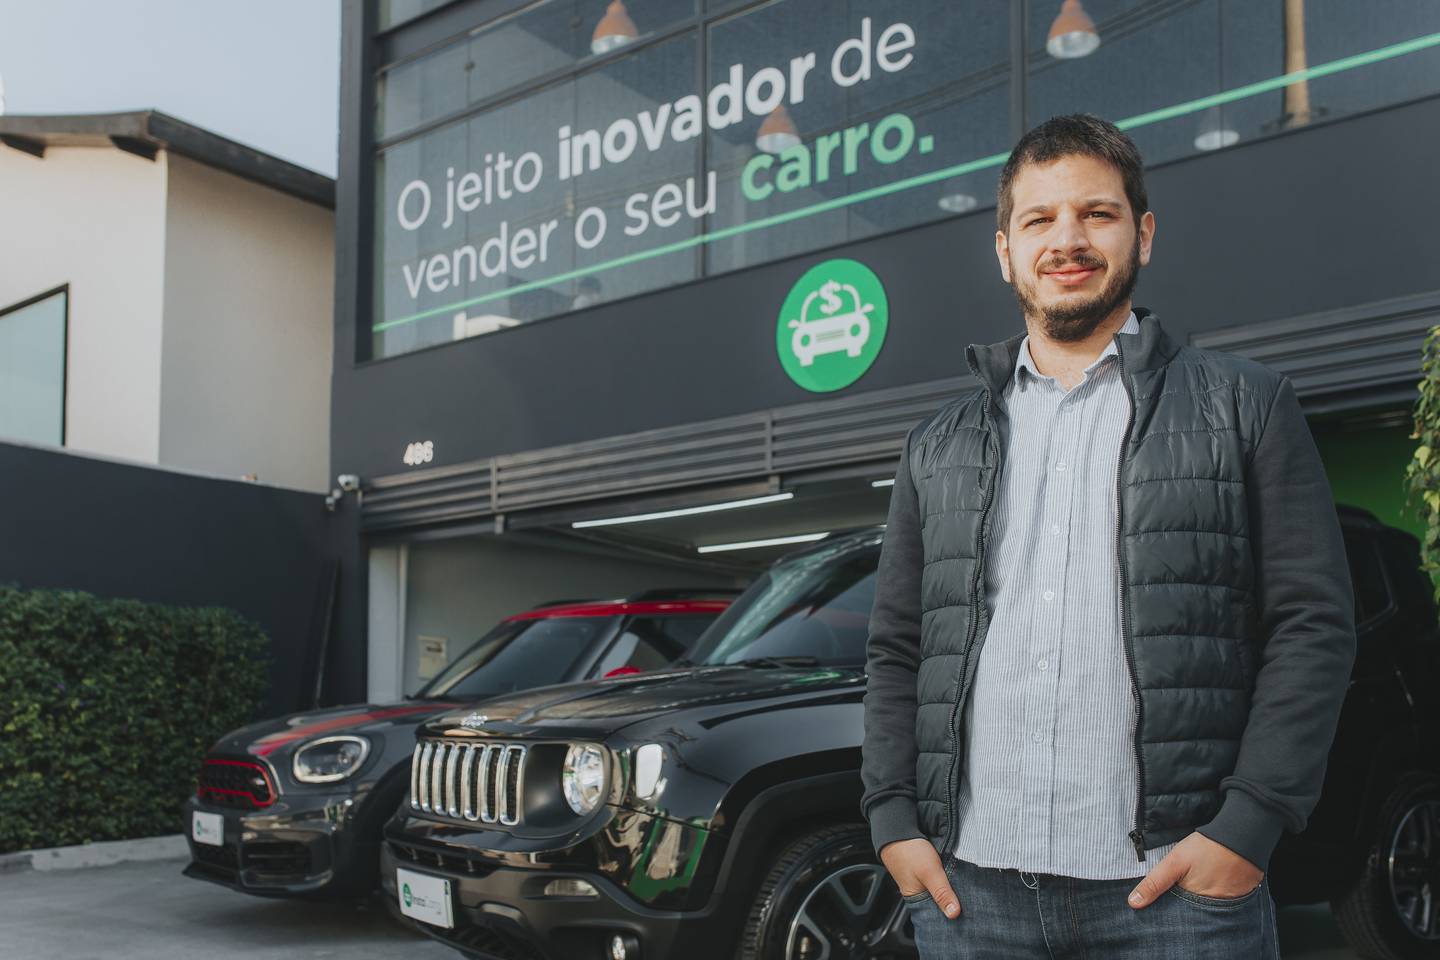 Luca Cafici is changing the way Brazilians buy and sell used cars with an innovative business model